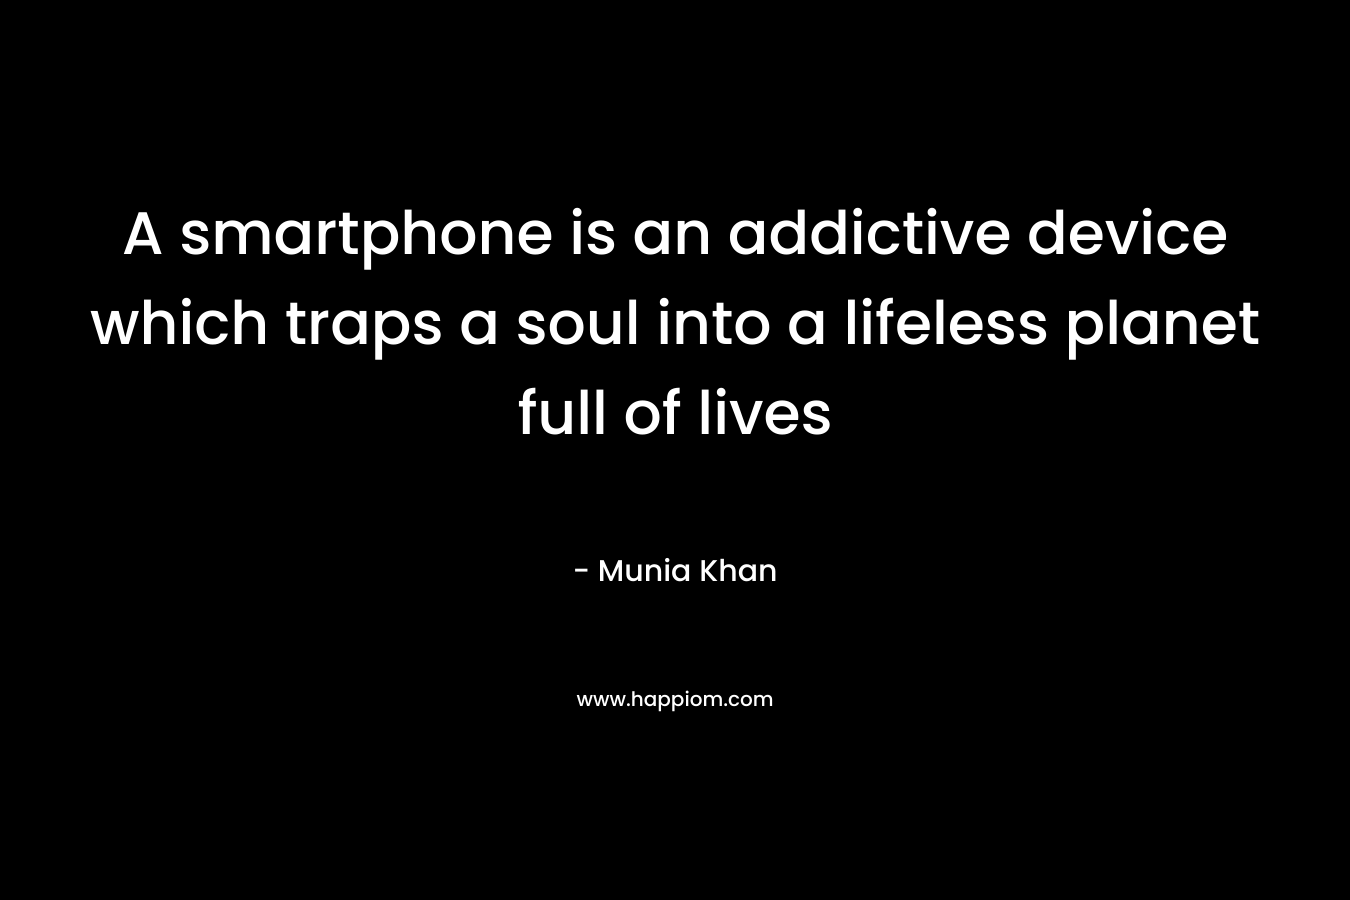 A smartphone is an addictive device which traps a soul into a lifeless planet full of lives – Munia Khan